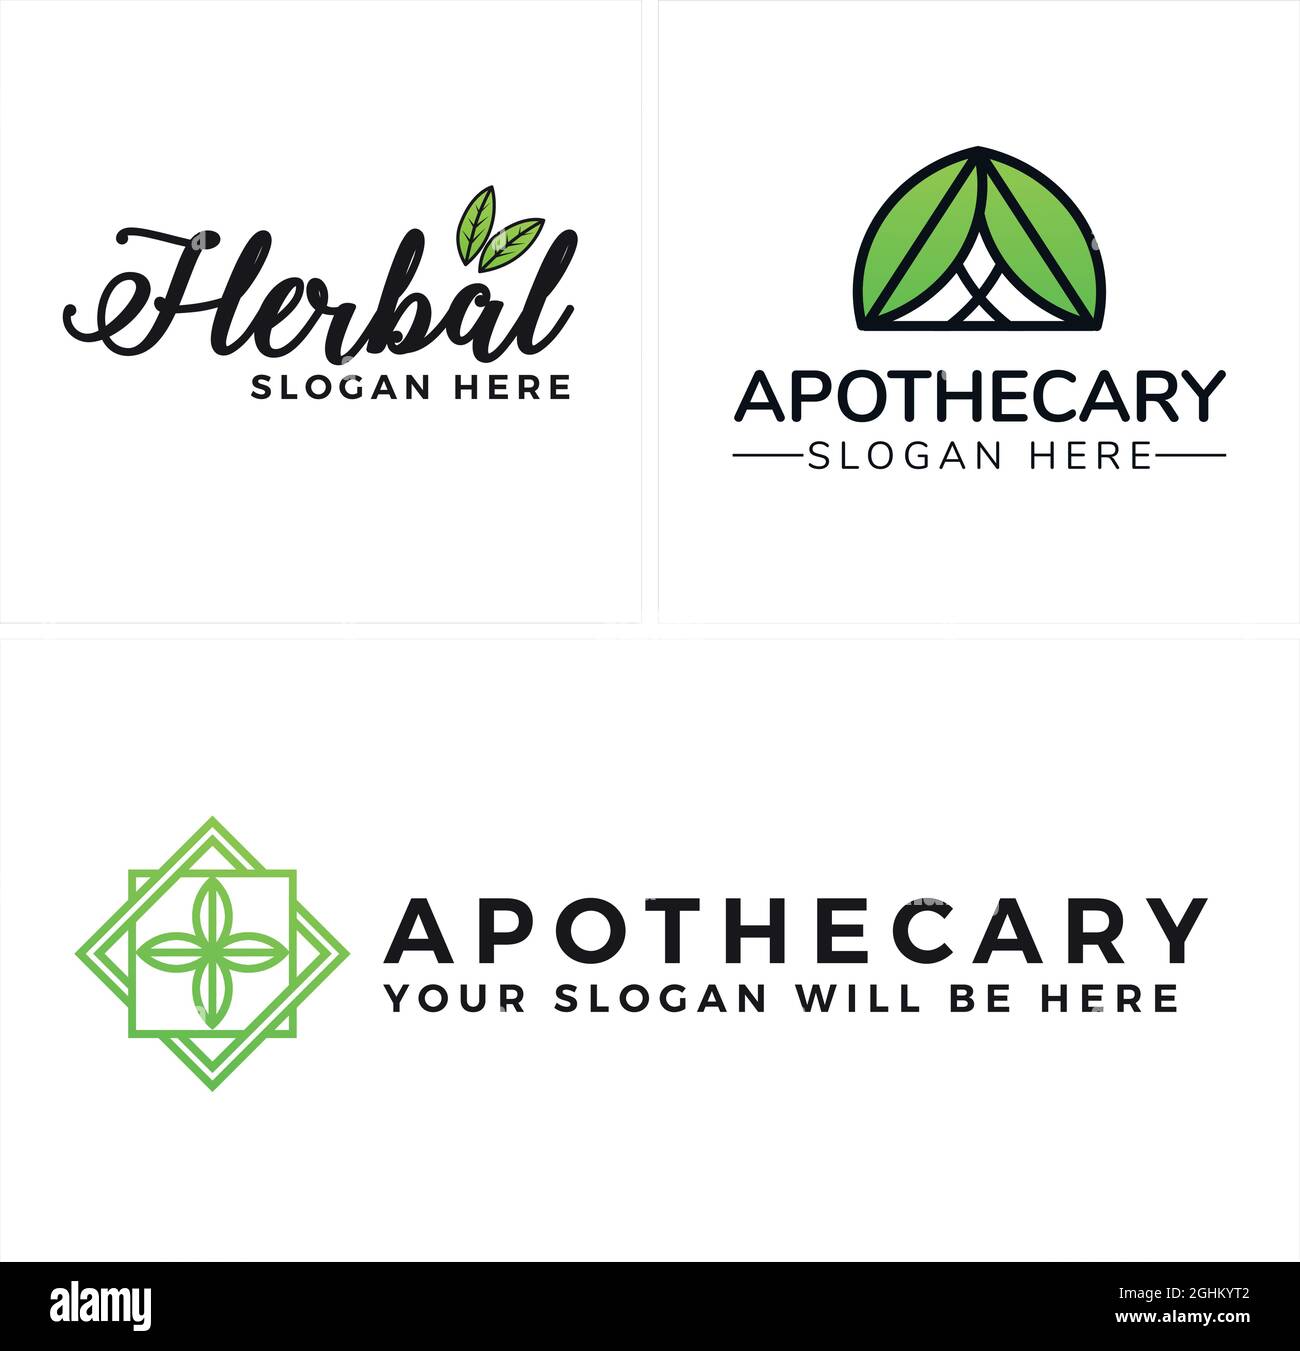 Retail apothecary herbal leaf natural logo design Stock Vector